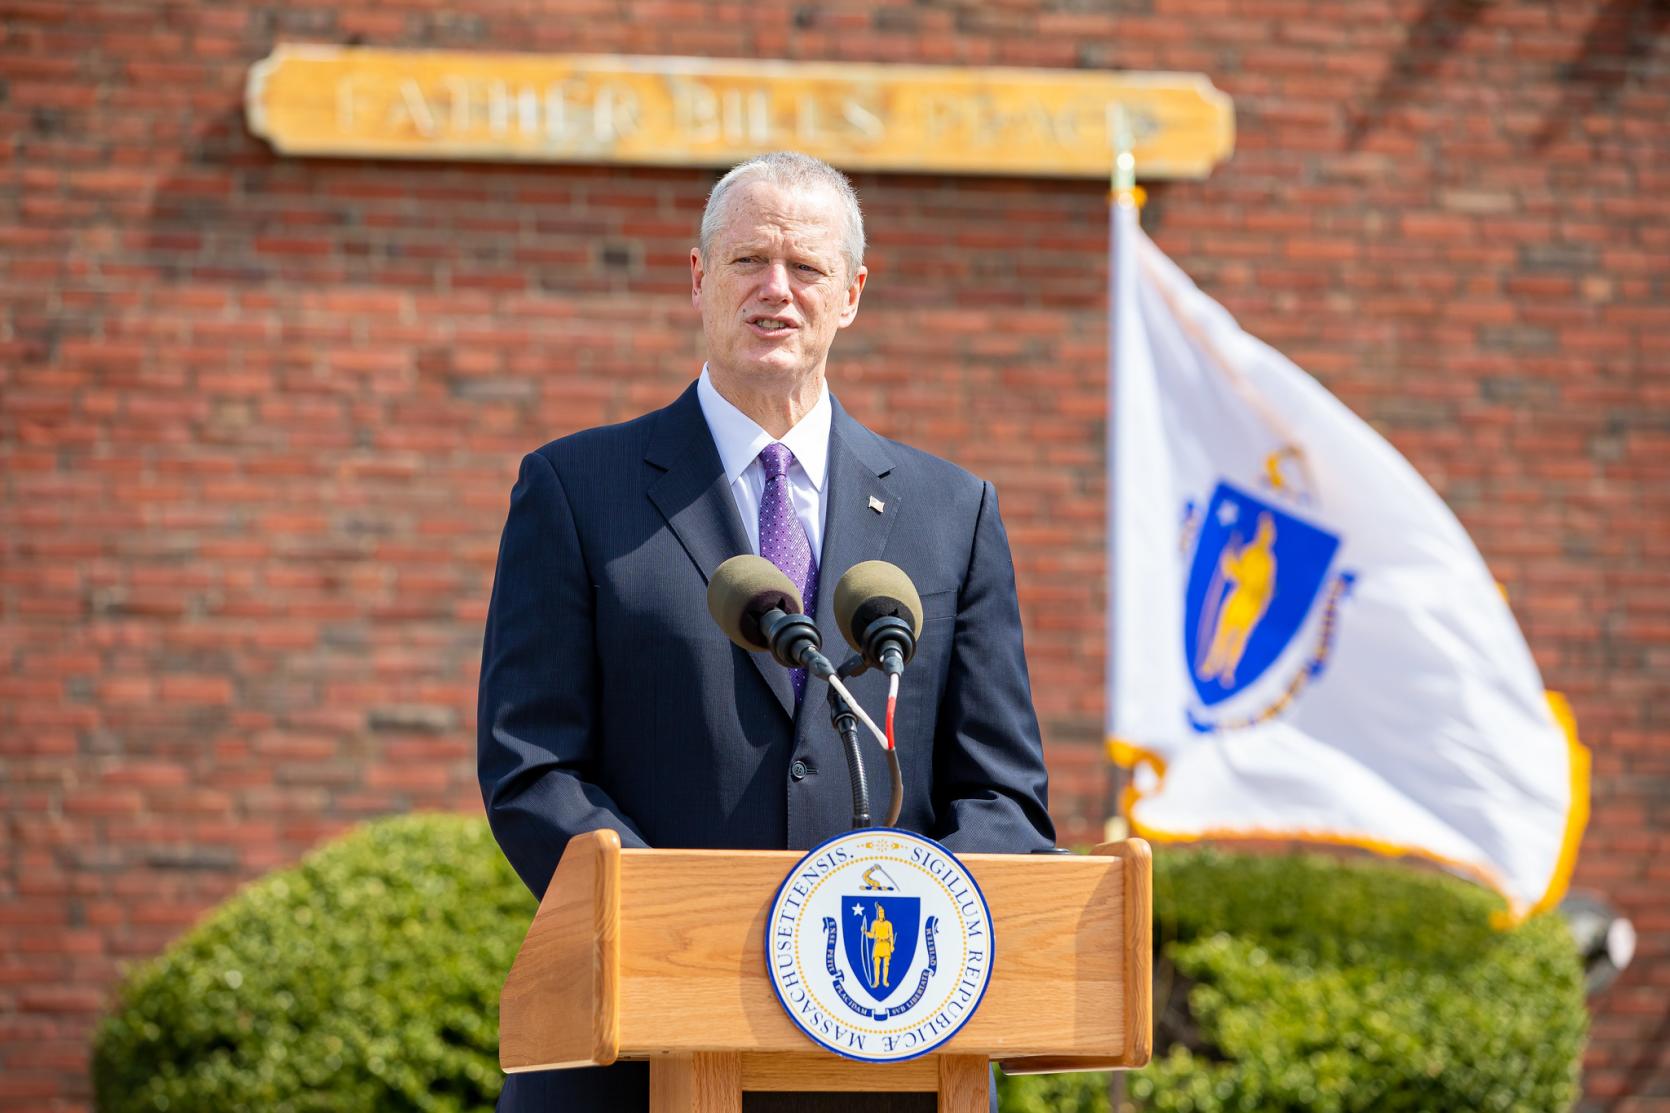 Governor Baker in Quincy to announce Housing Choice grants and designations.